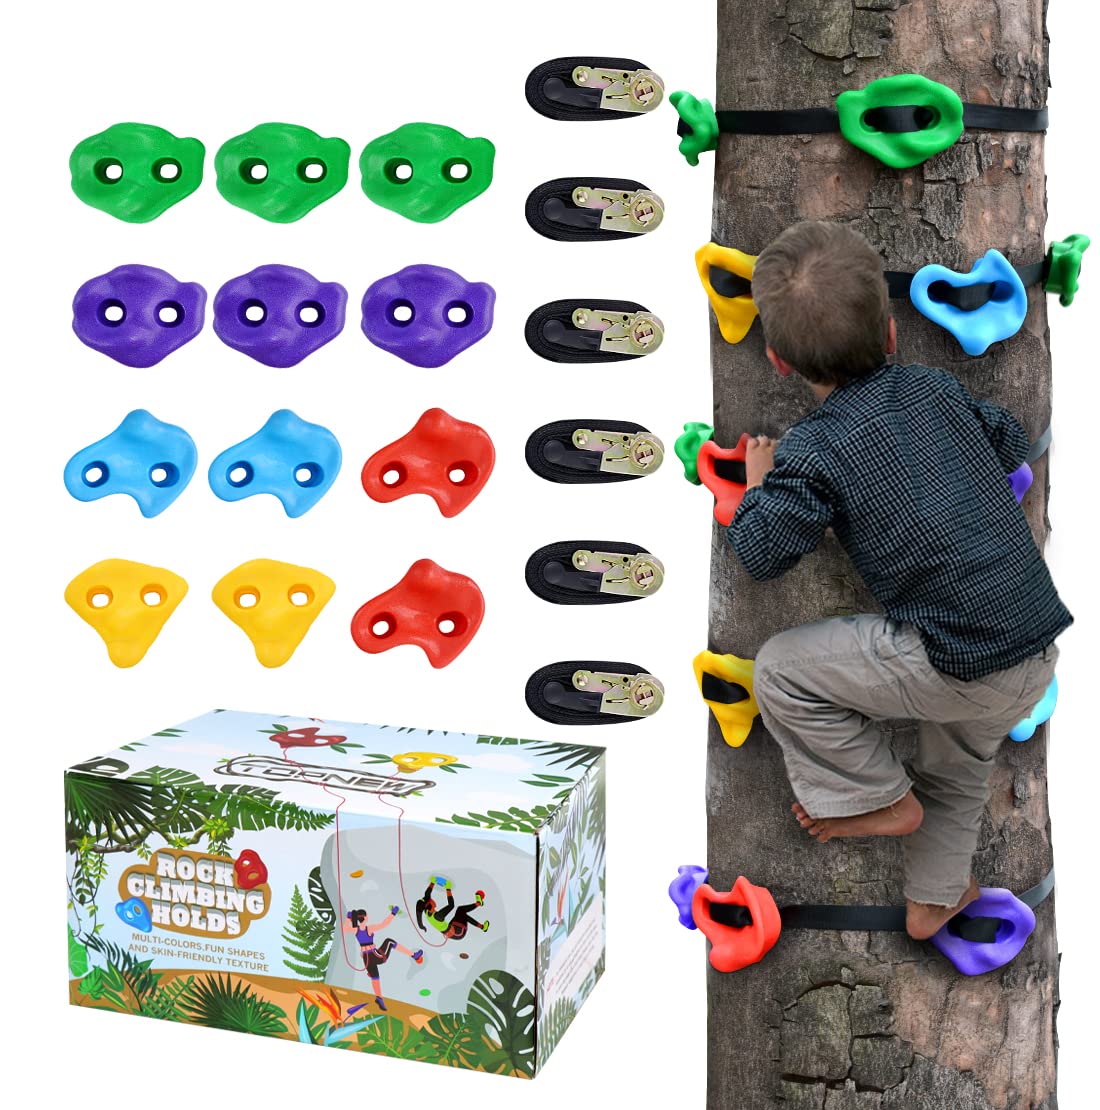 TOPNEW 12 Ninja Tree climbing Holds for Kids climber, Adult climbing Rocks with 6 Ratchet Straps for Outdoor Ninja Warrior Obsta